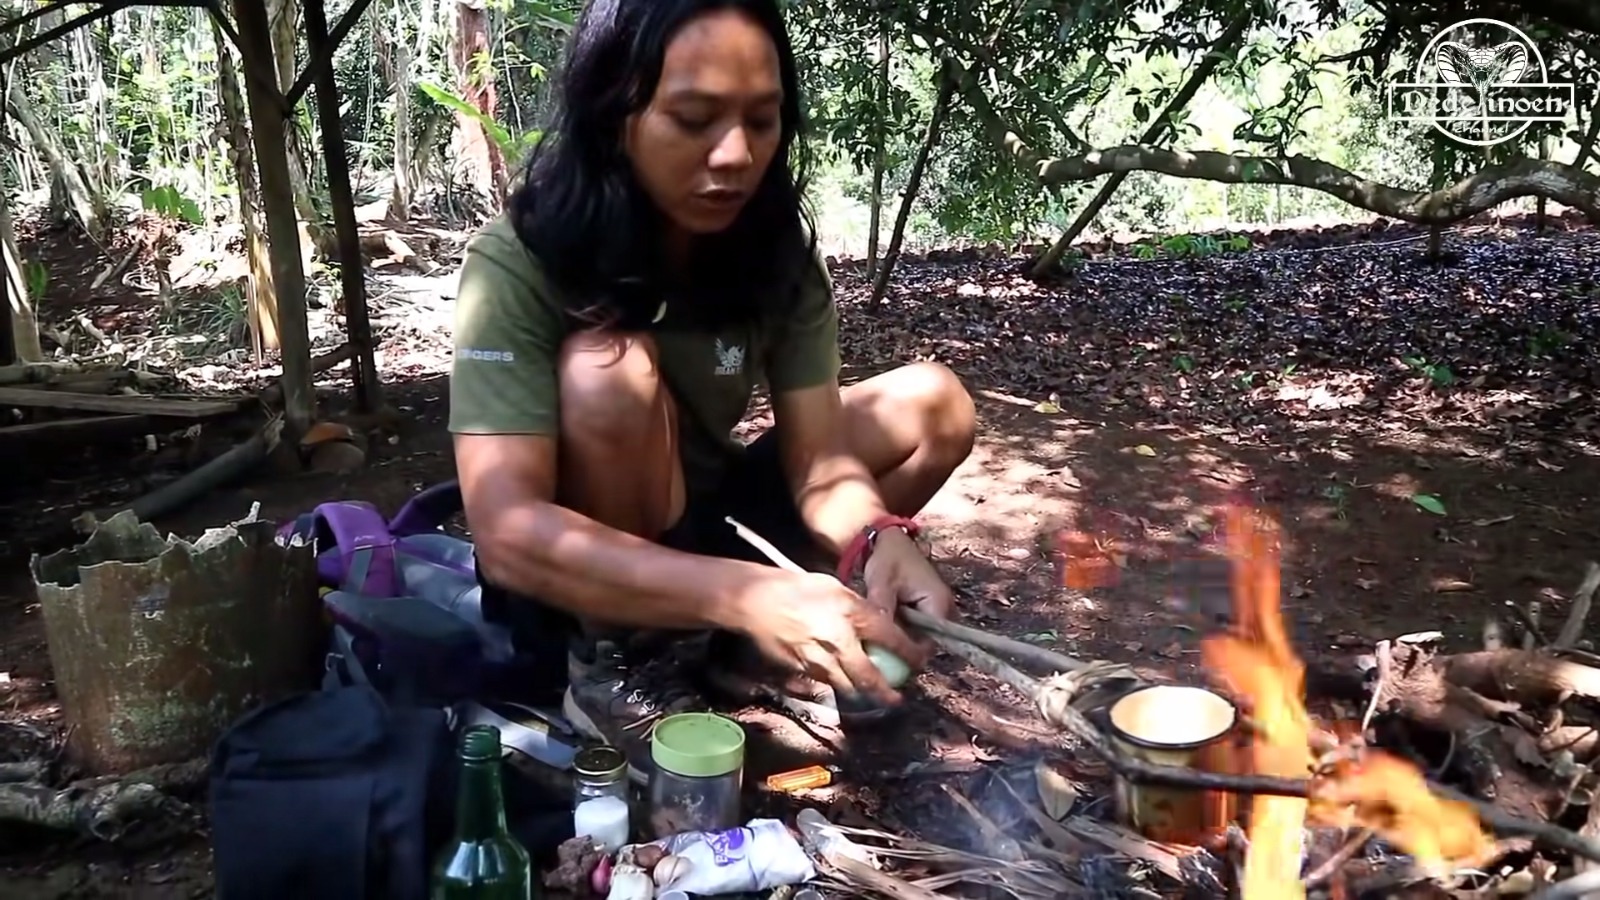 YouTuber Explores Haunted Forest, Cooks Offerings Found Under a Big Tree Near a Grave